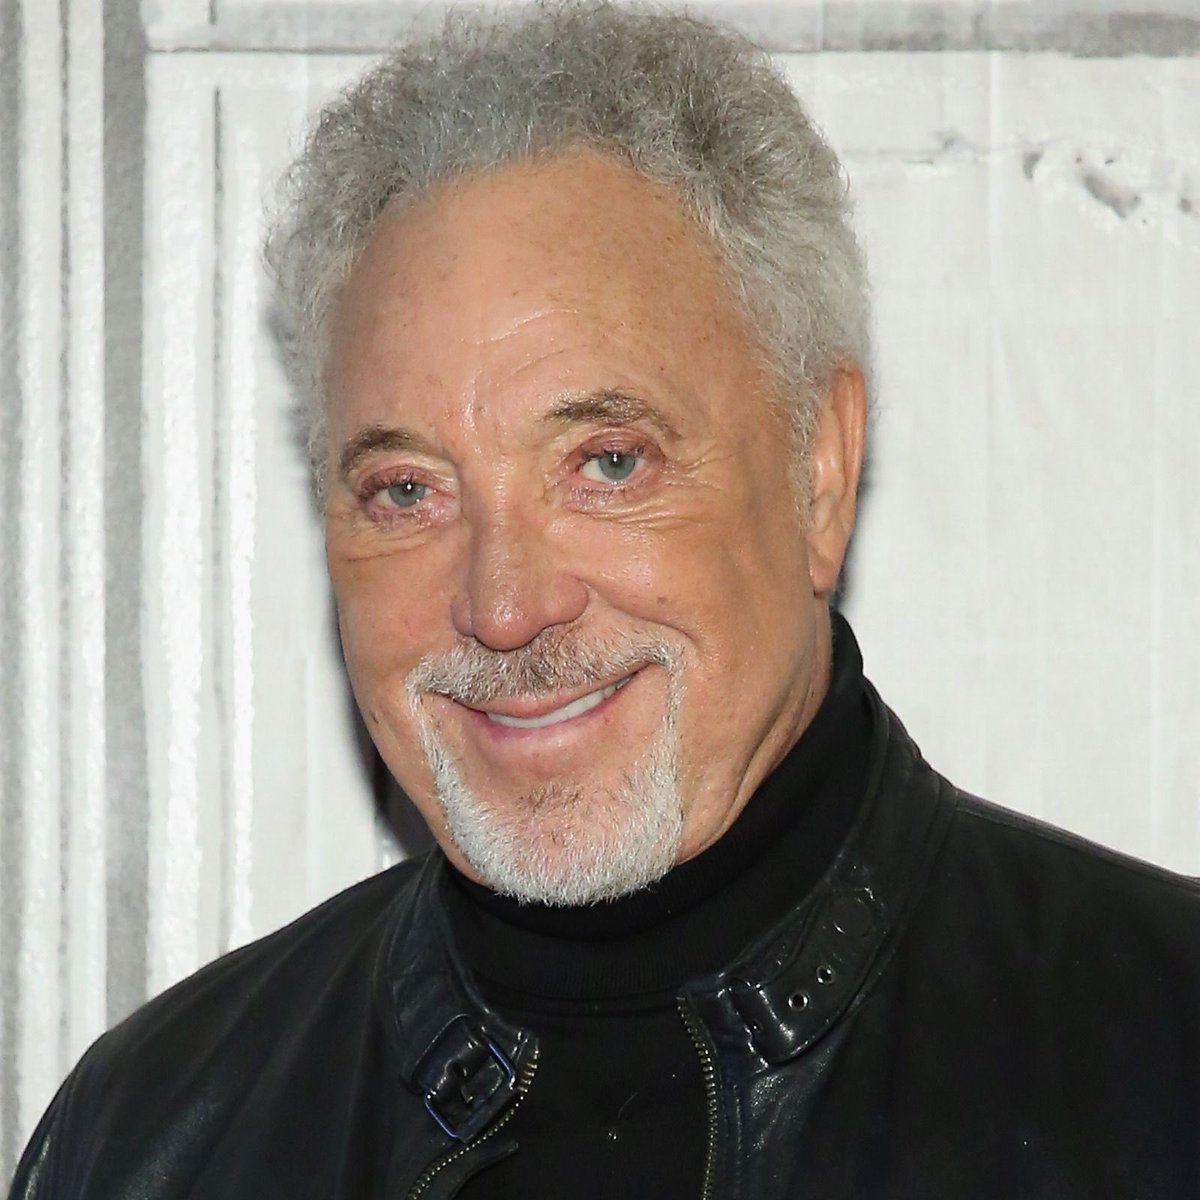 Just seen that Sir Tom Jones is trending and thought the worst and I’m relieved to know that he is still with us he is a legend and National Treasure we love you Sir Tom #TomJones